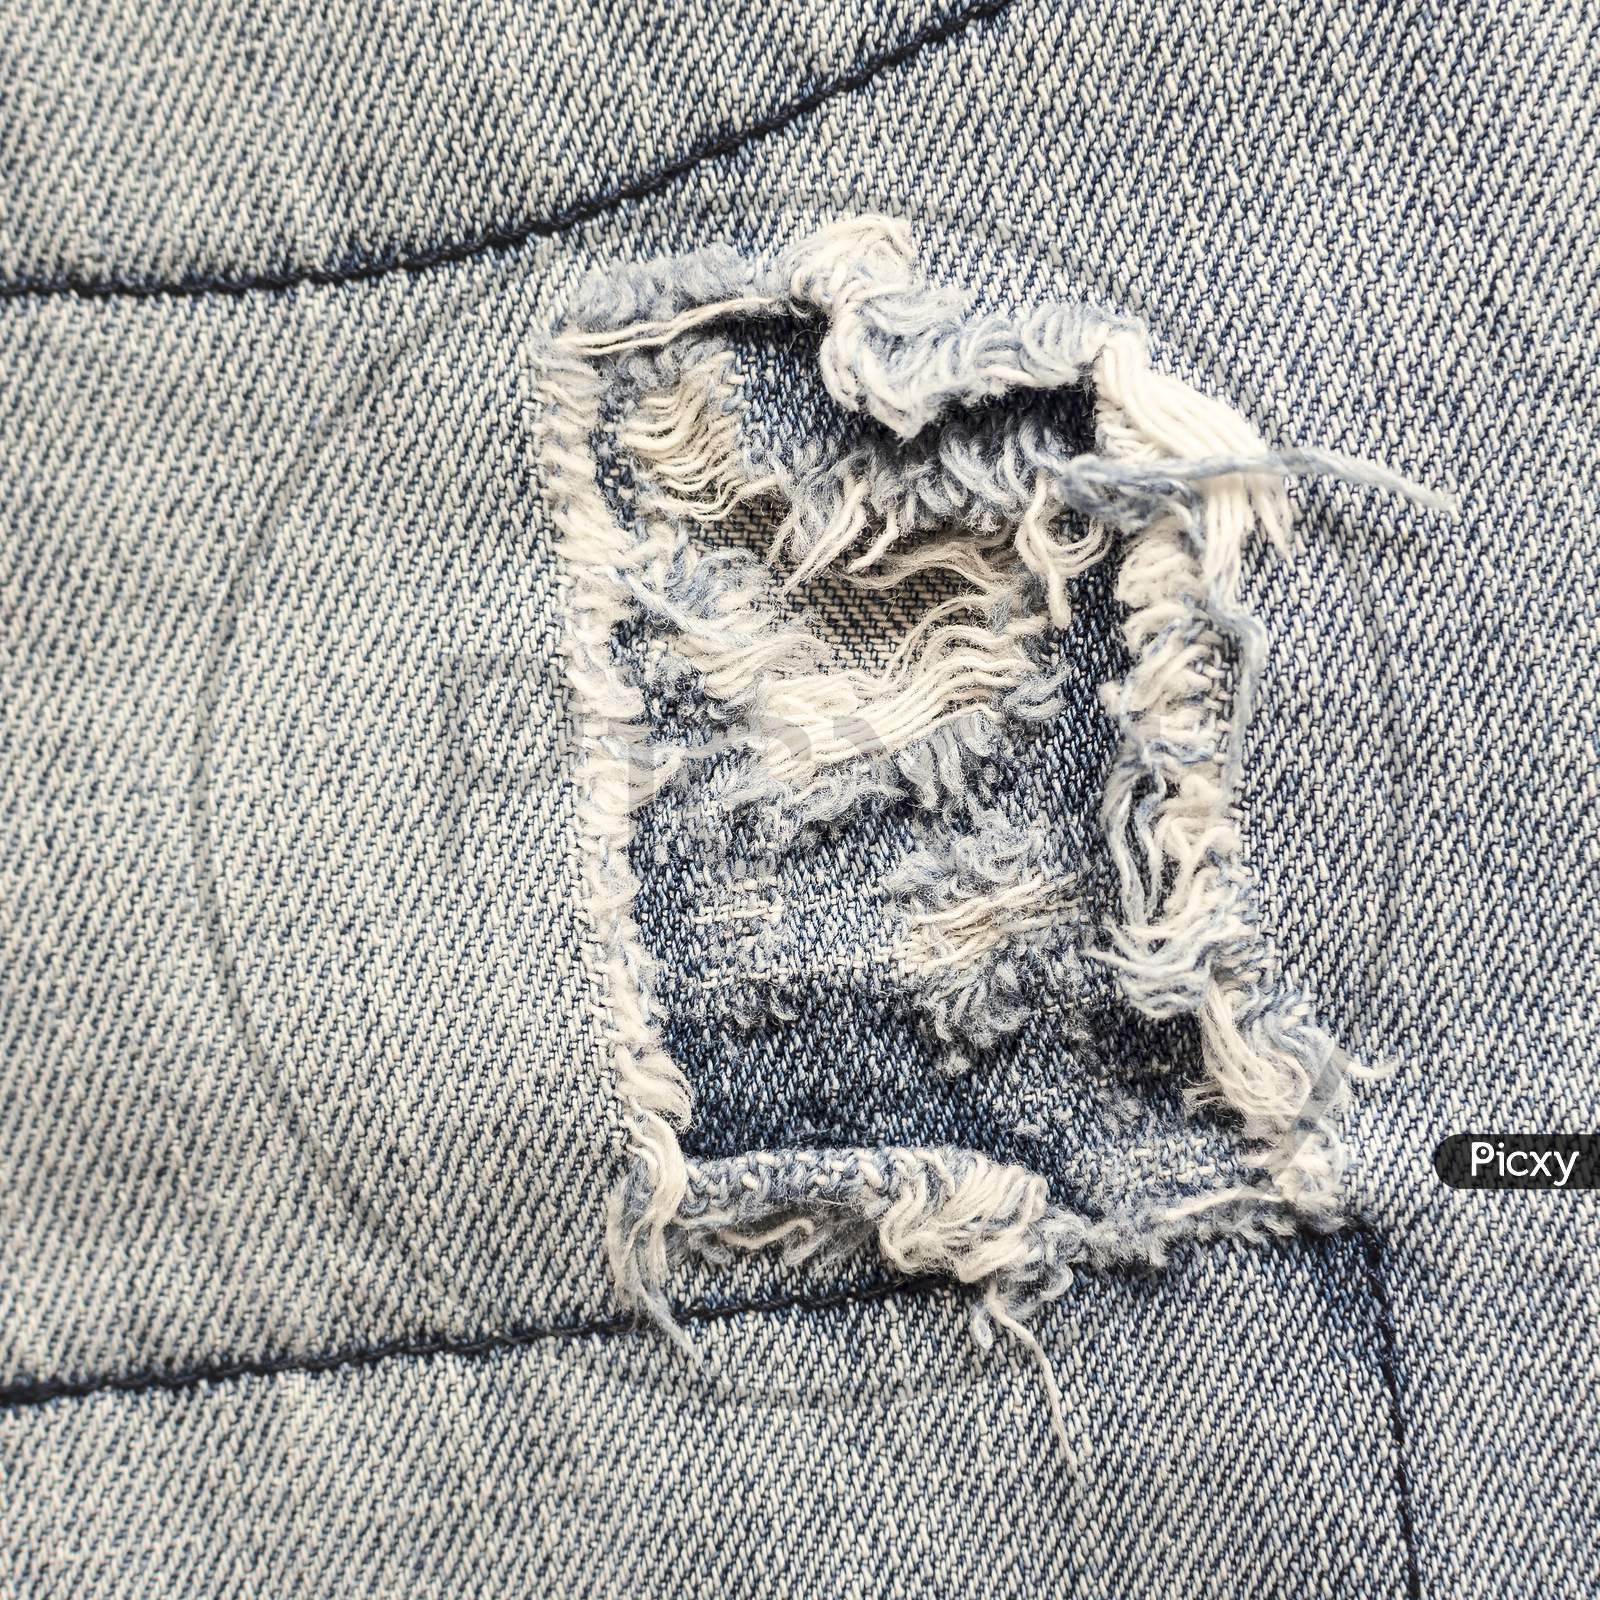 Denim Jeans Texture With Old Torn